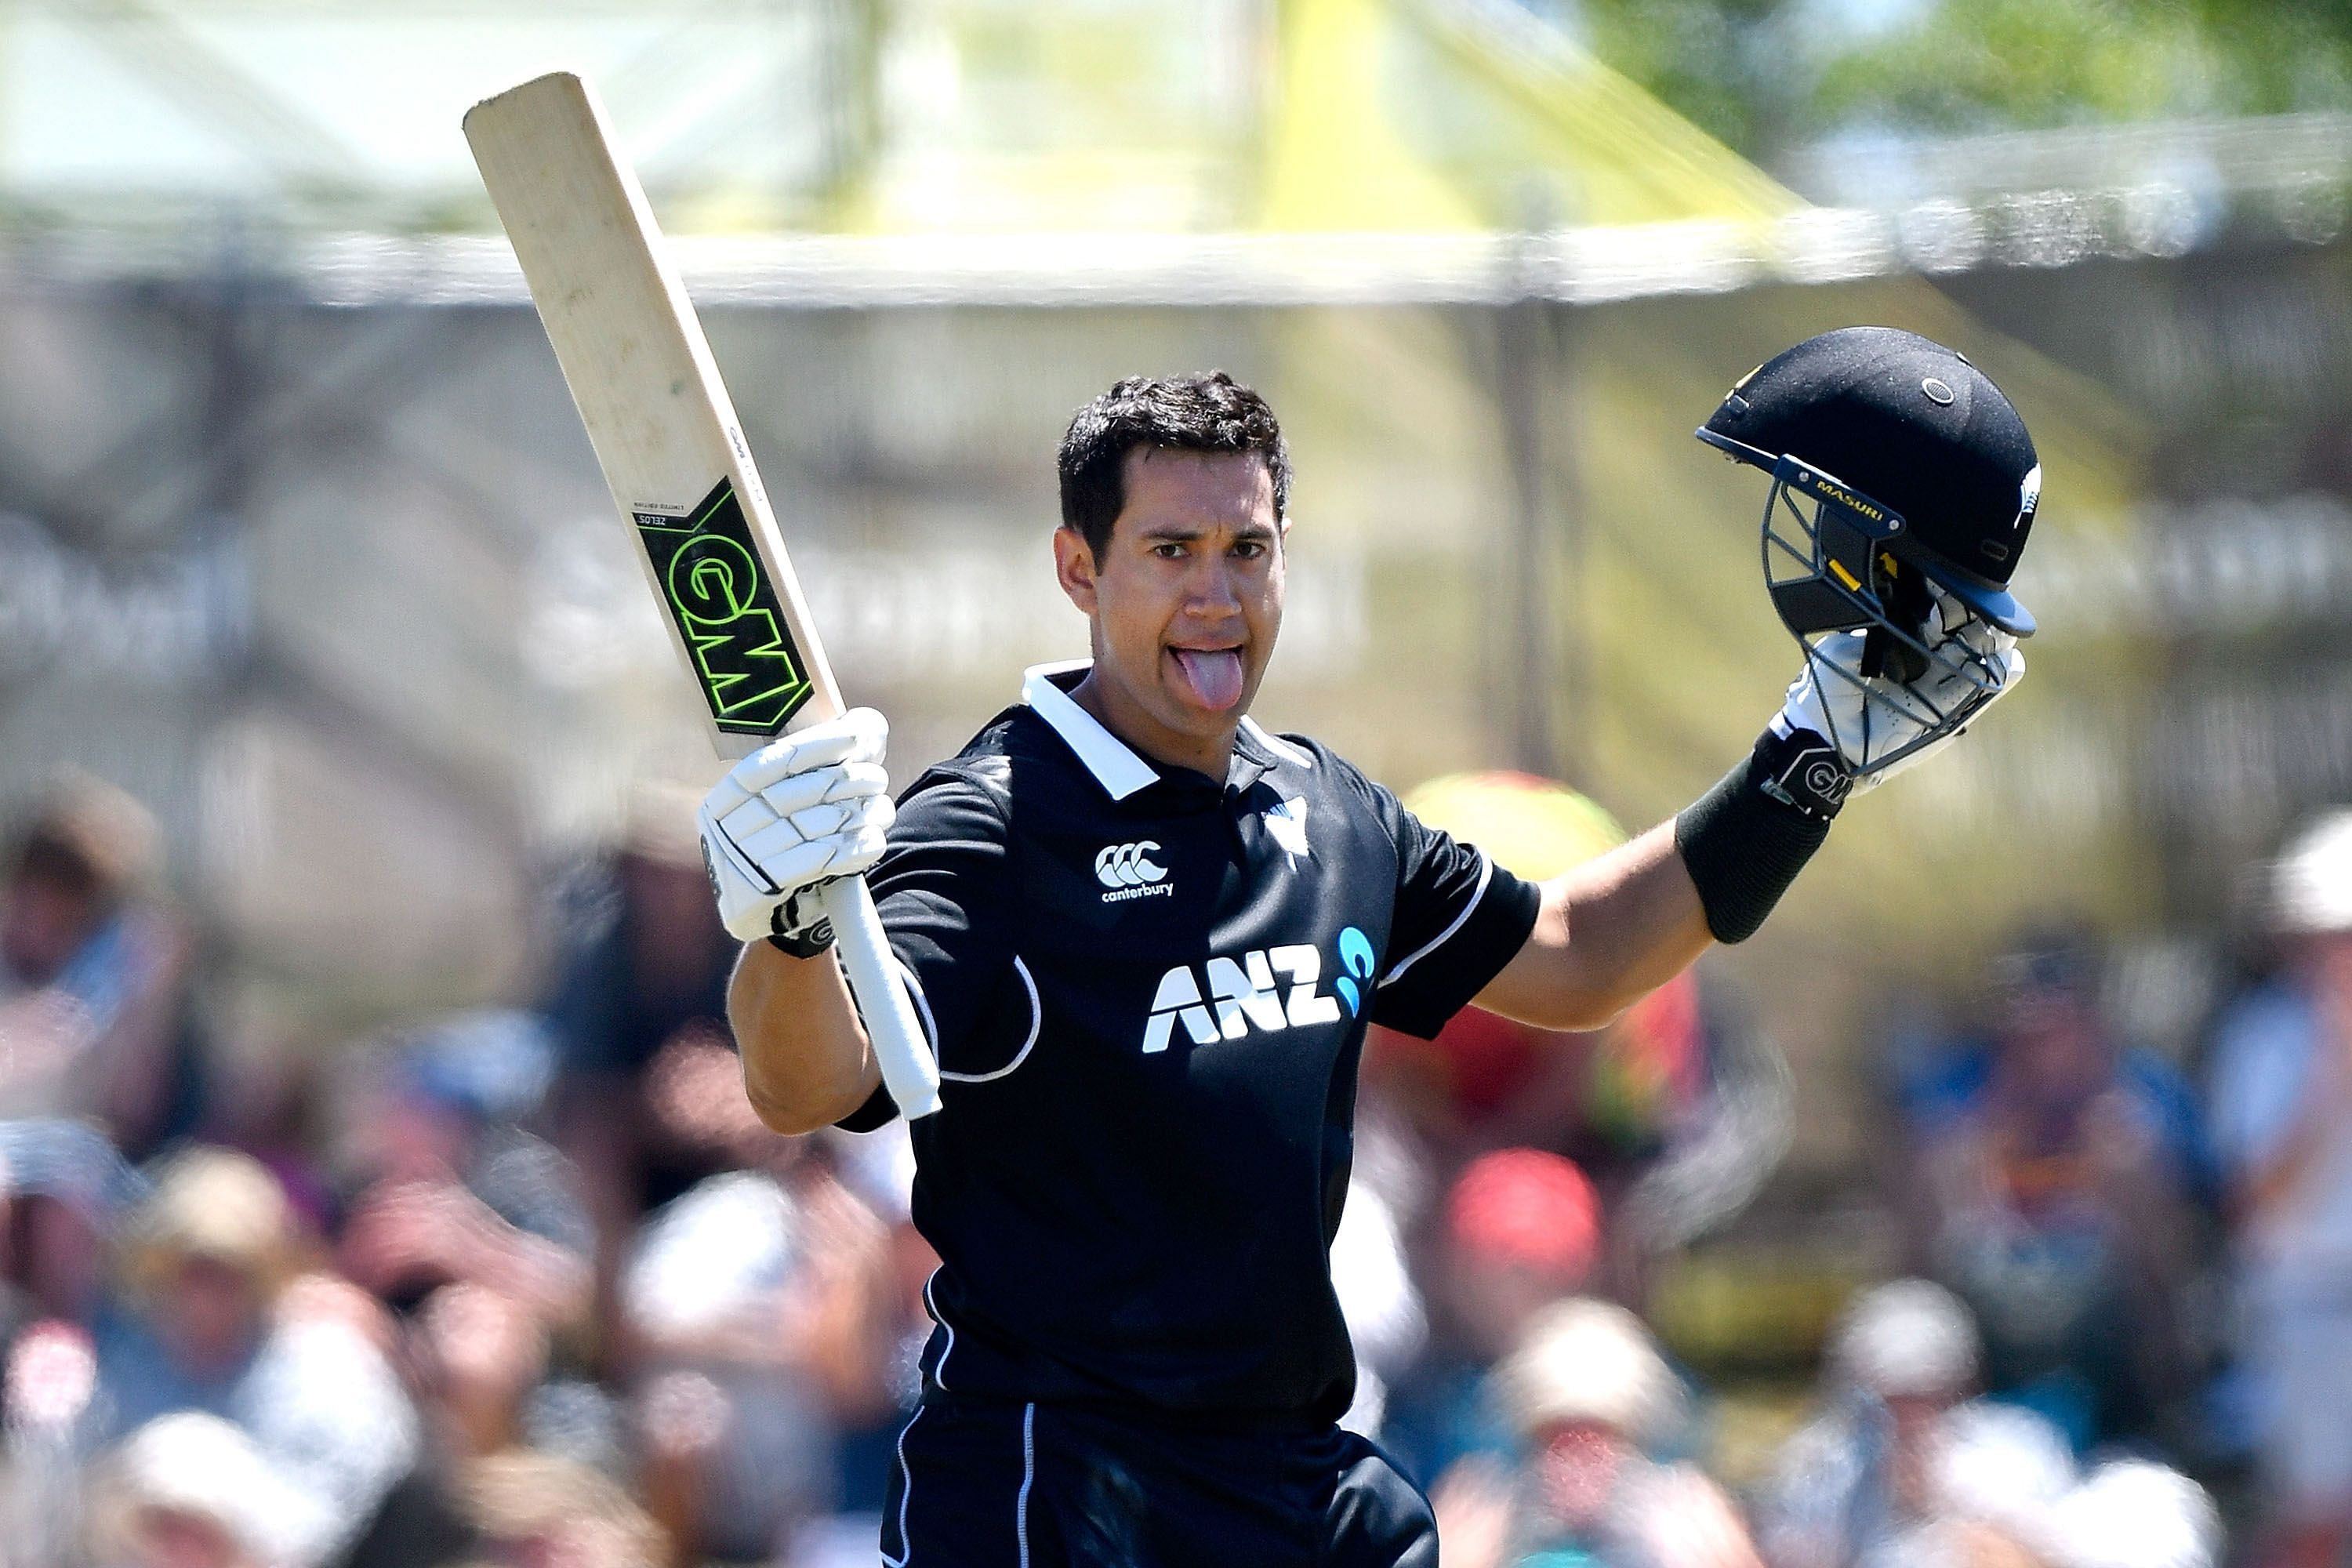  New Zealand's Ross Taylor celebrates after completing a century against Sri Lanka on Tuesday. AFP